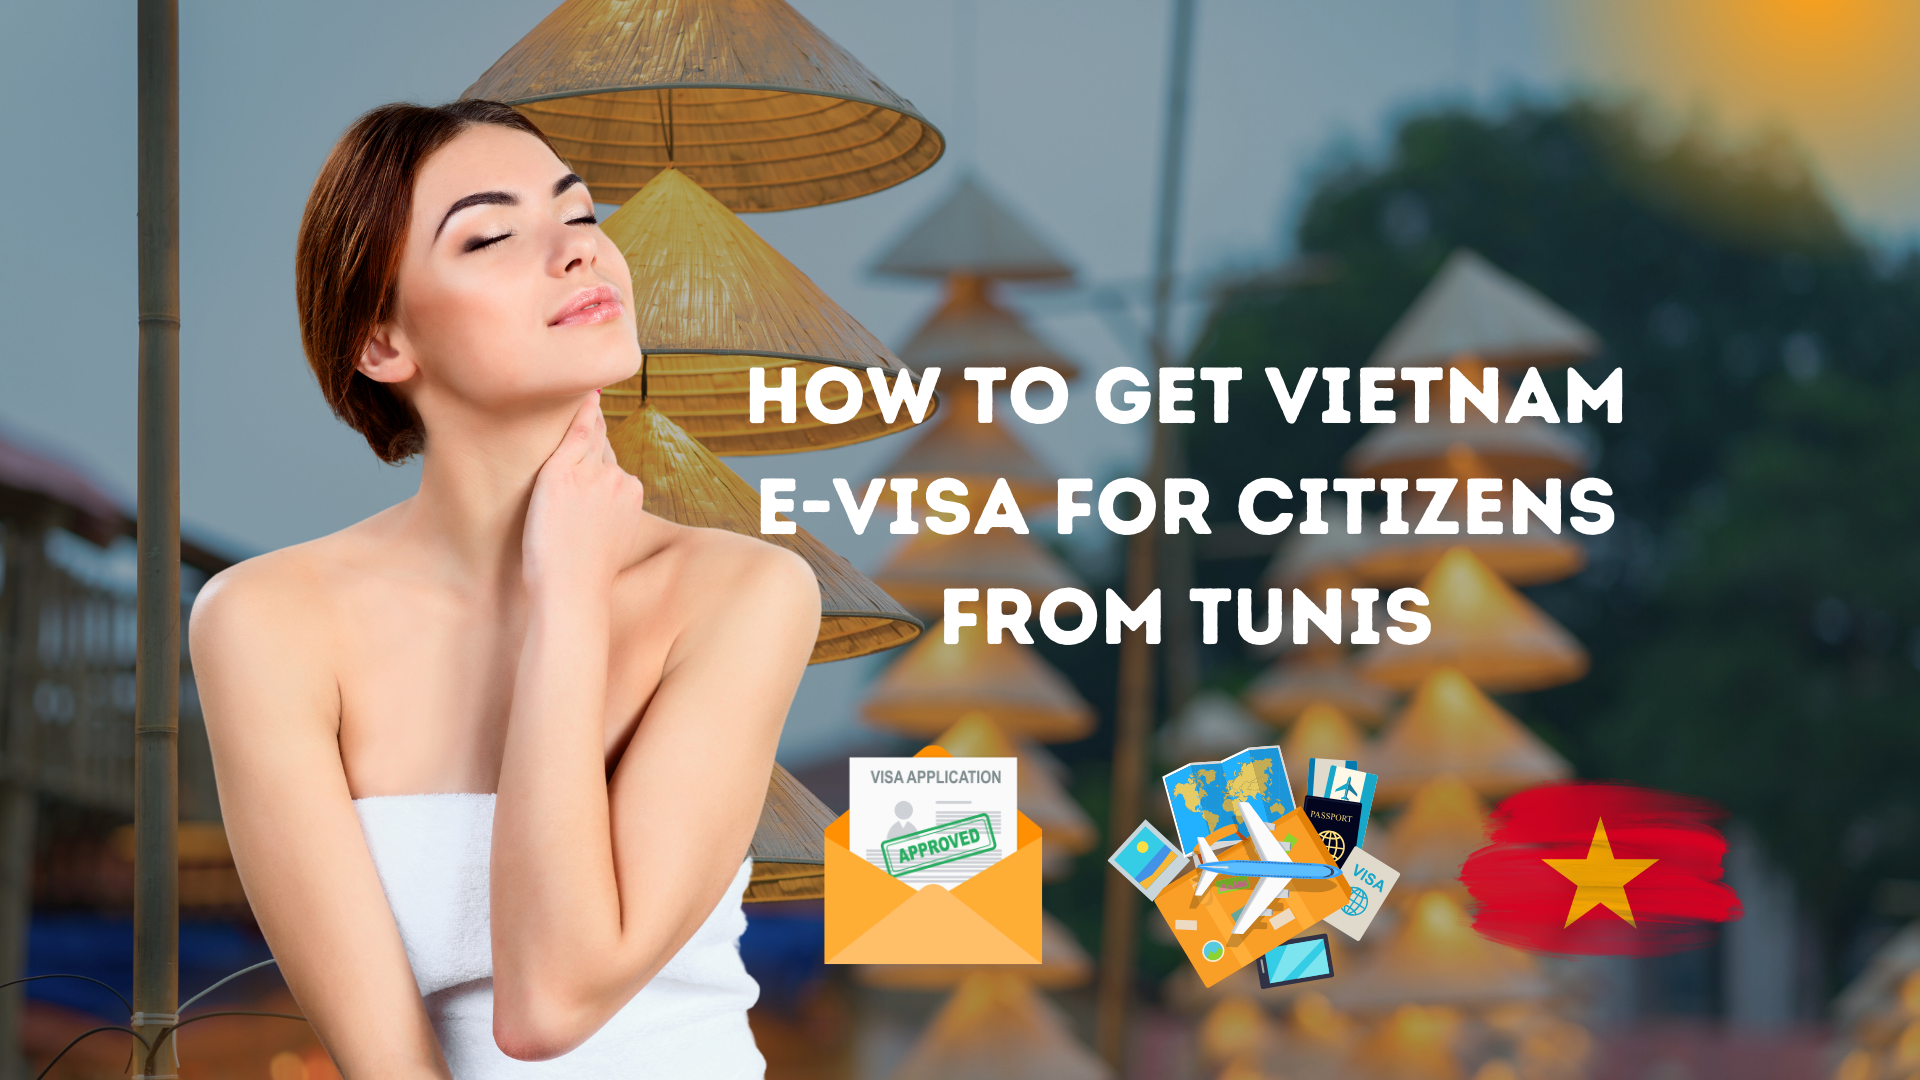 Vietnam Evisa for Citizens from Tunis